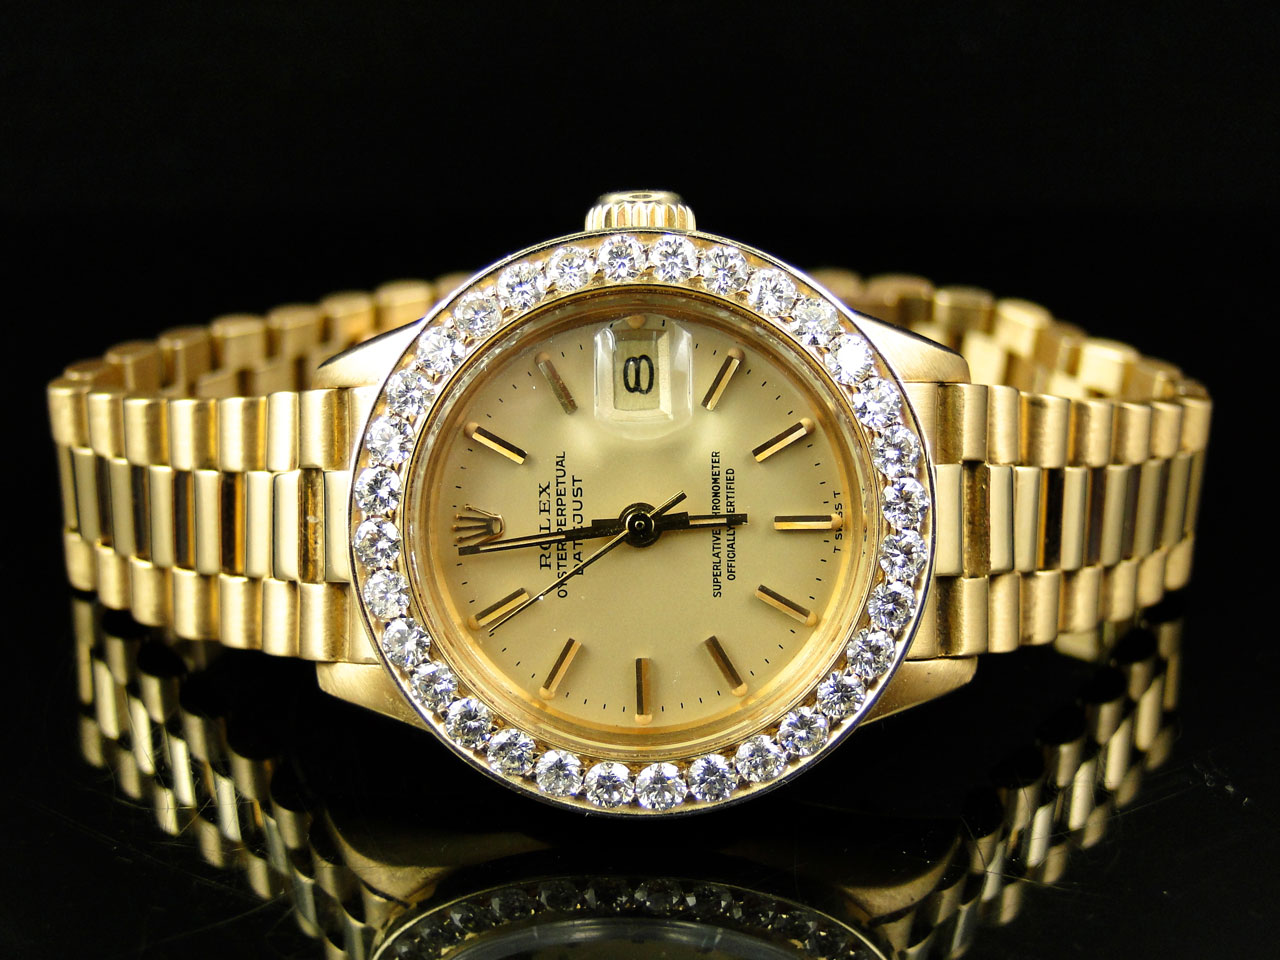 Rolex 18k Gold Watch Price - How do you Price a Switches?